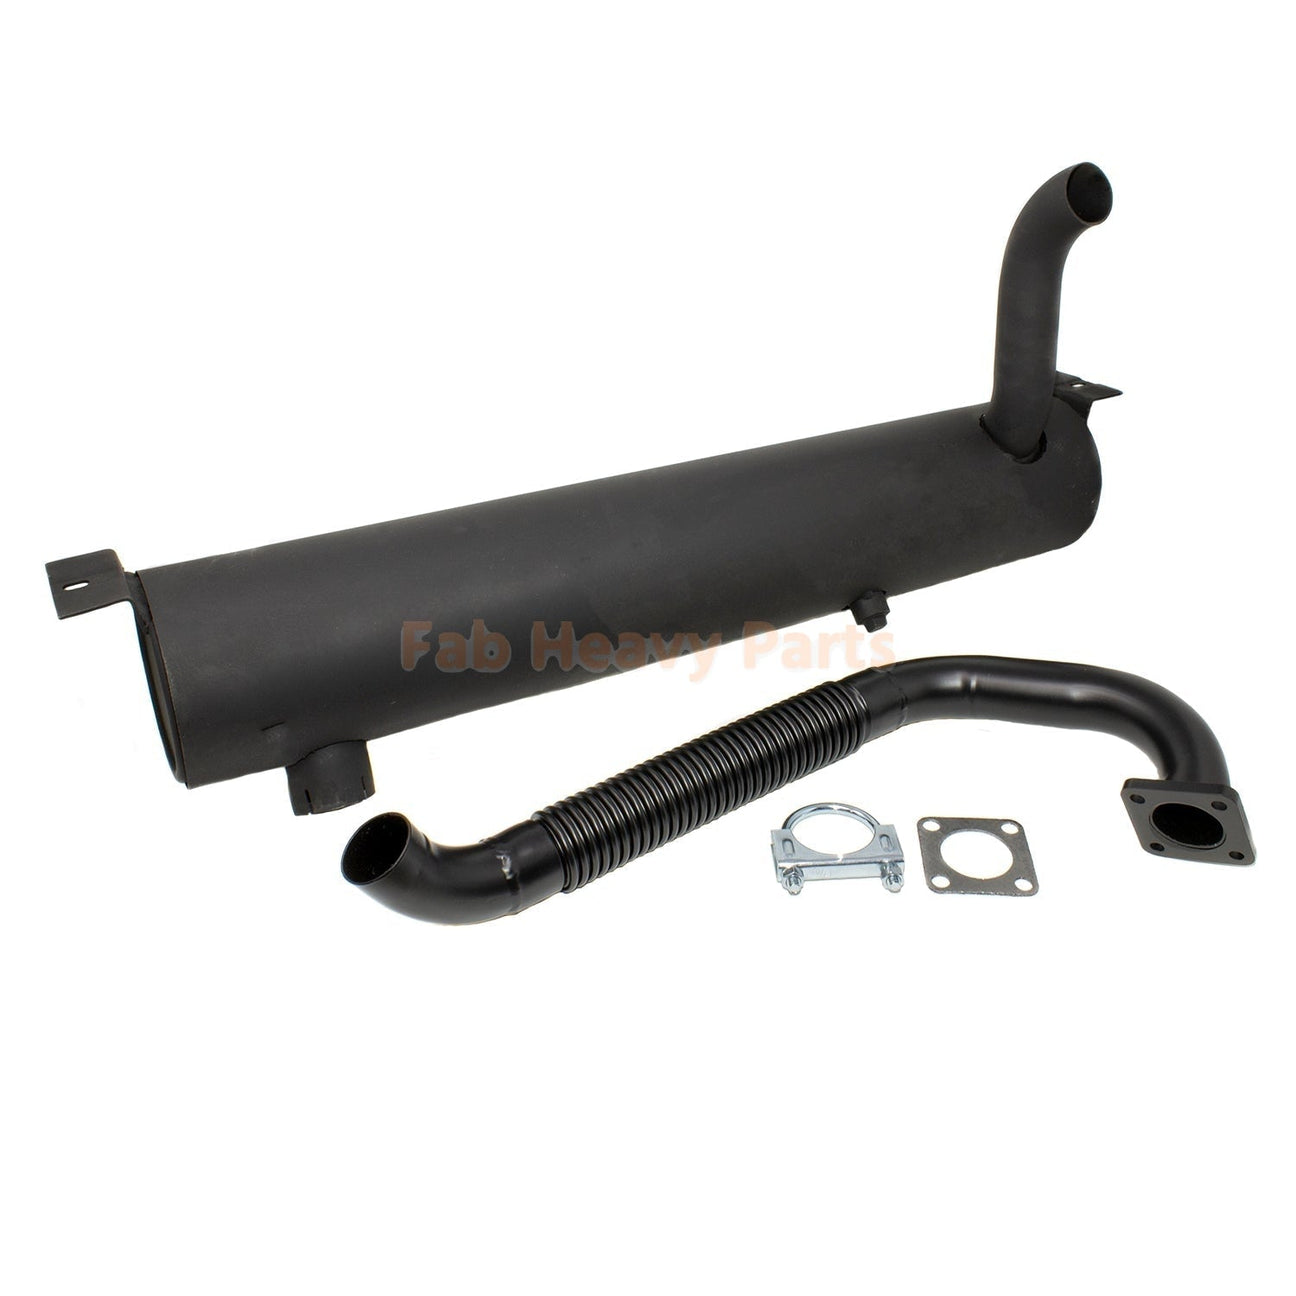 6671667, Muffler & Exhaust Pipe Kit for Bobcat Loader 751, 753, 763, 773, 7753, S130, S150, S160, S175, T140 - Fab Heavy Parts